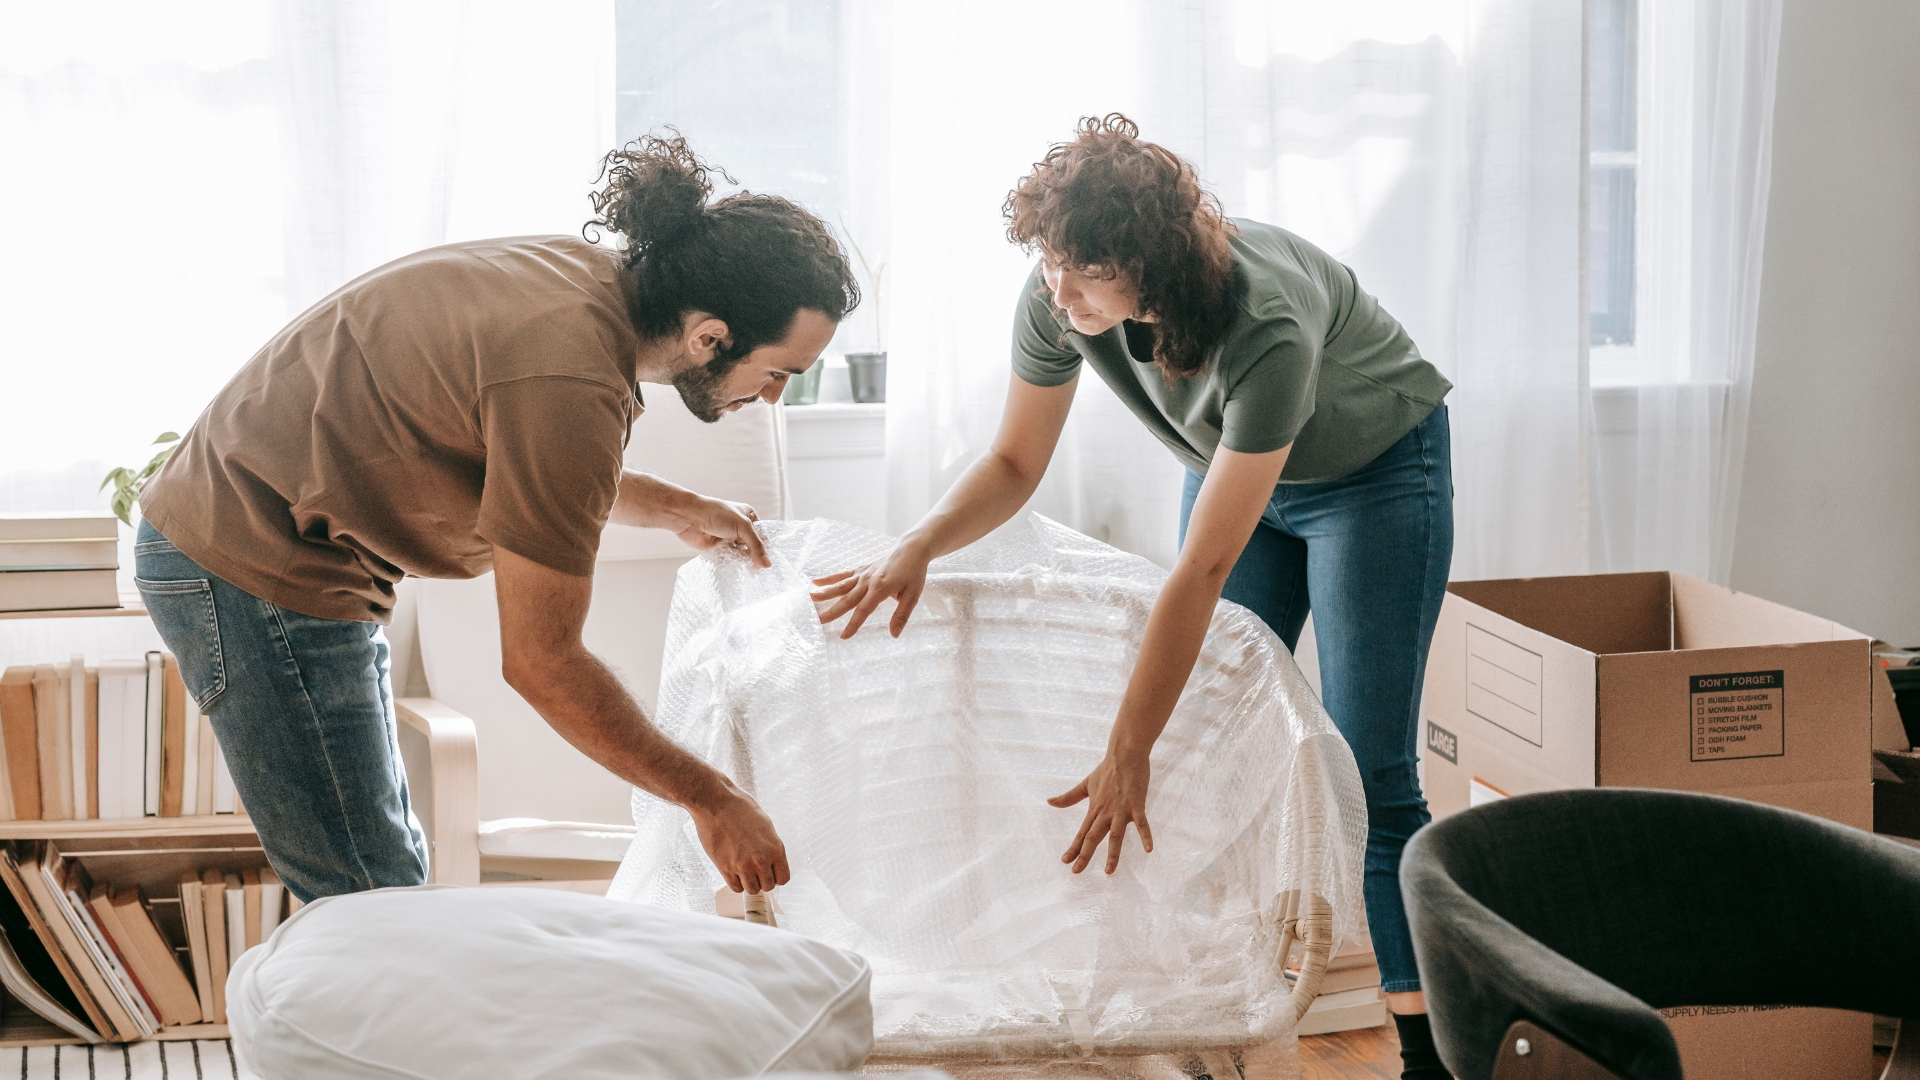 Can I pack my belongings myself instead of using packers and movers?